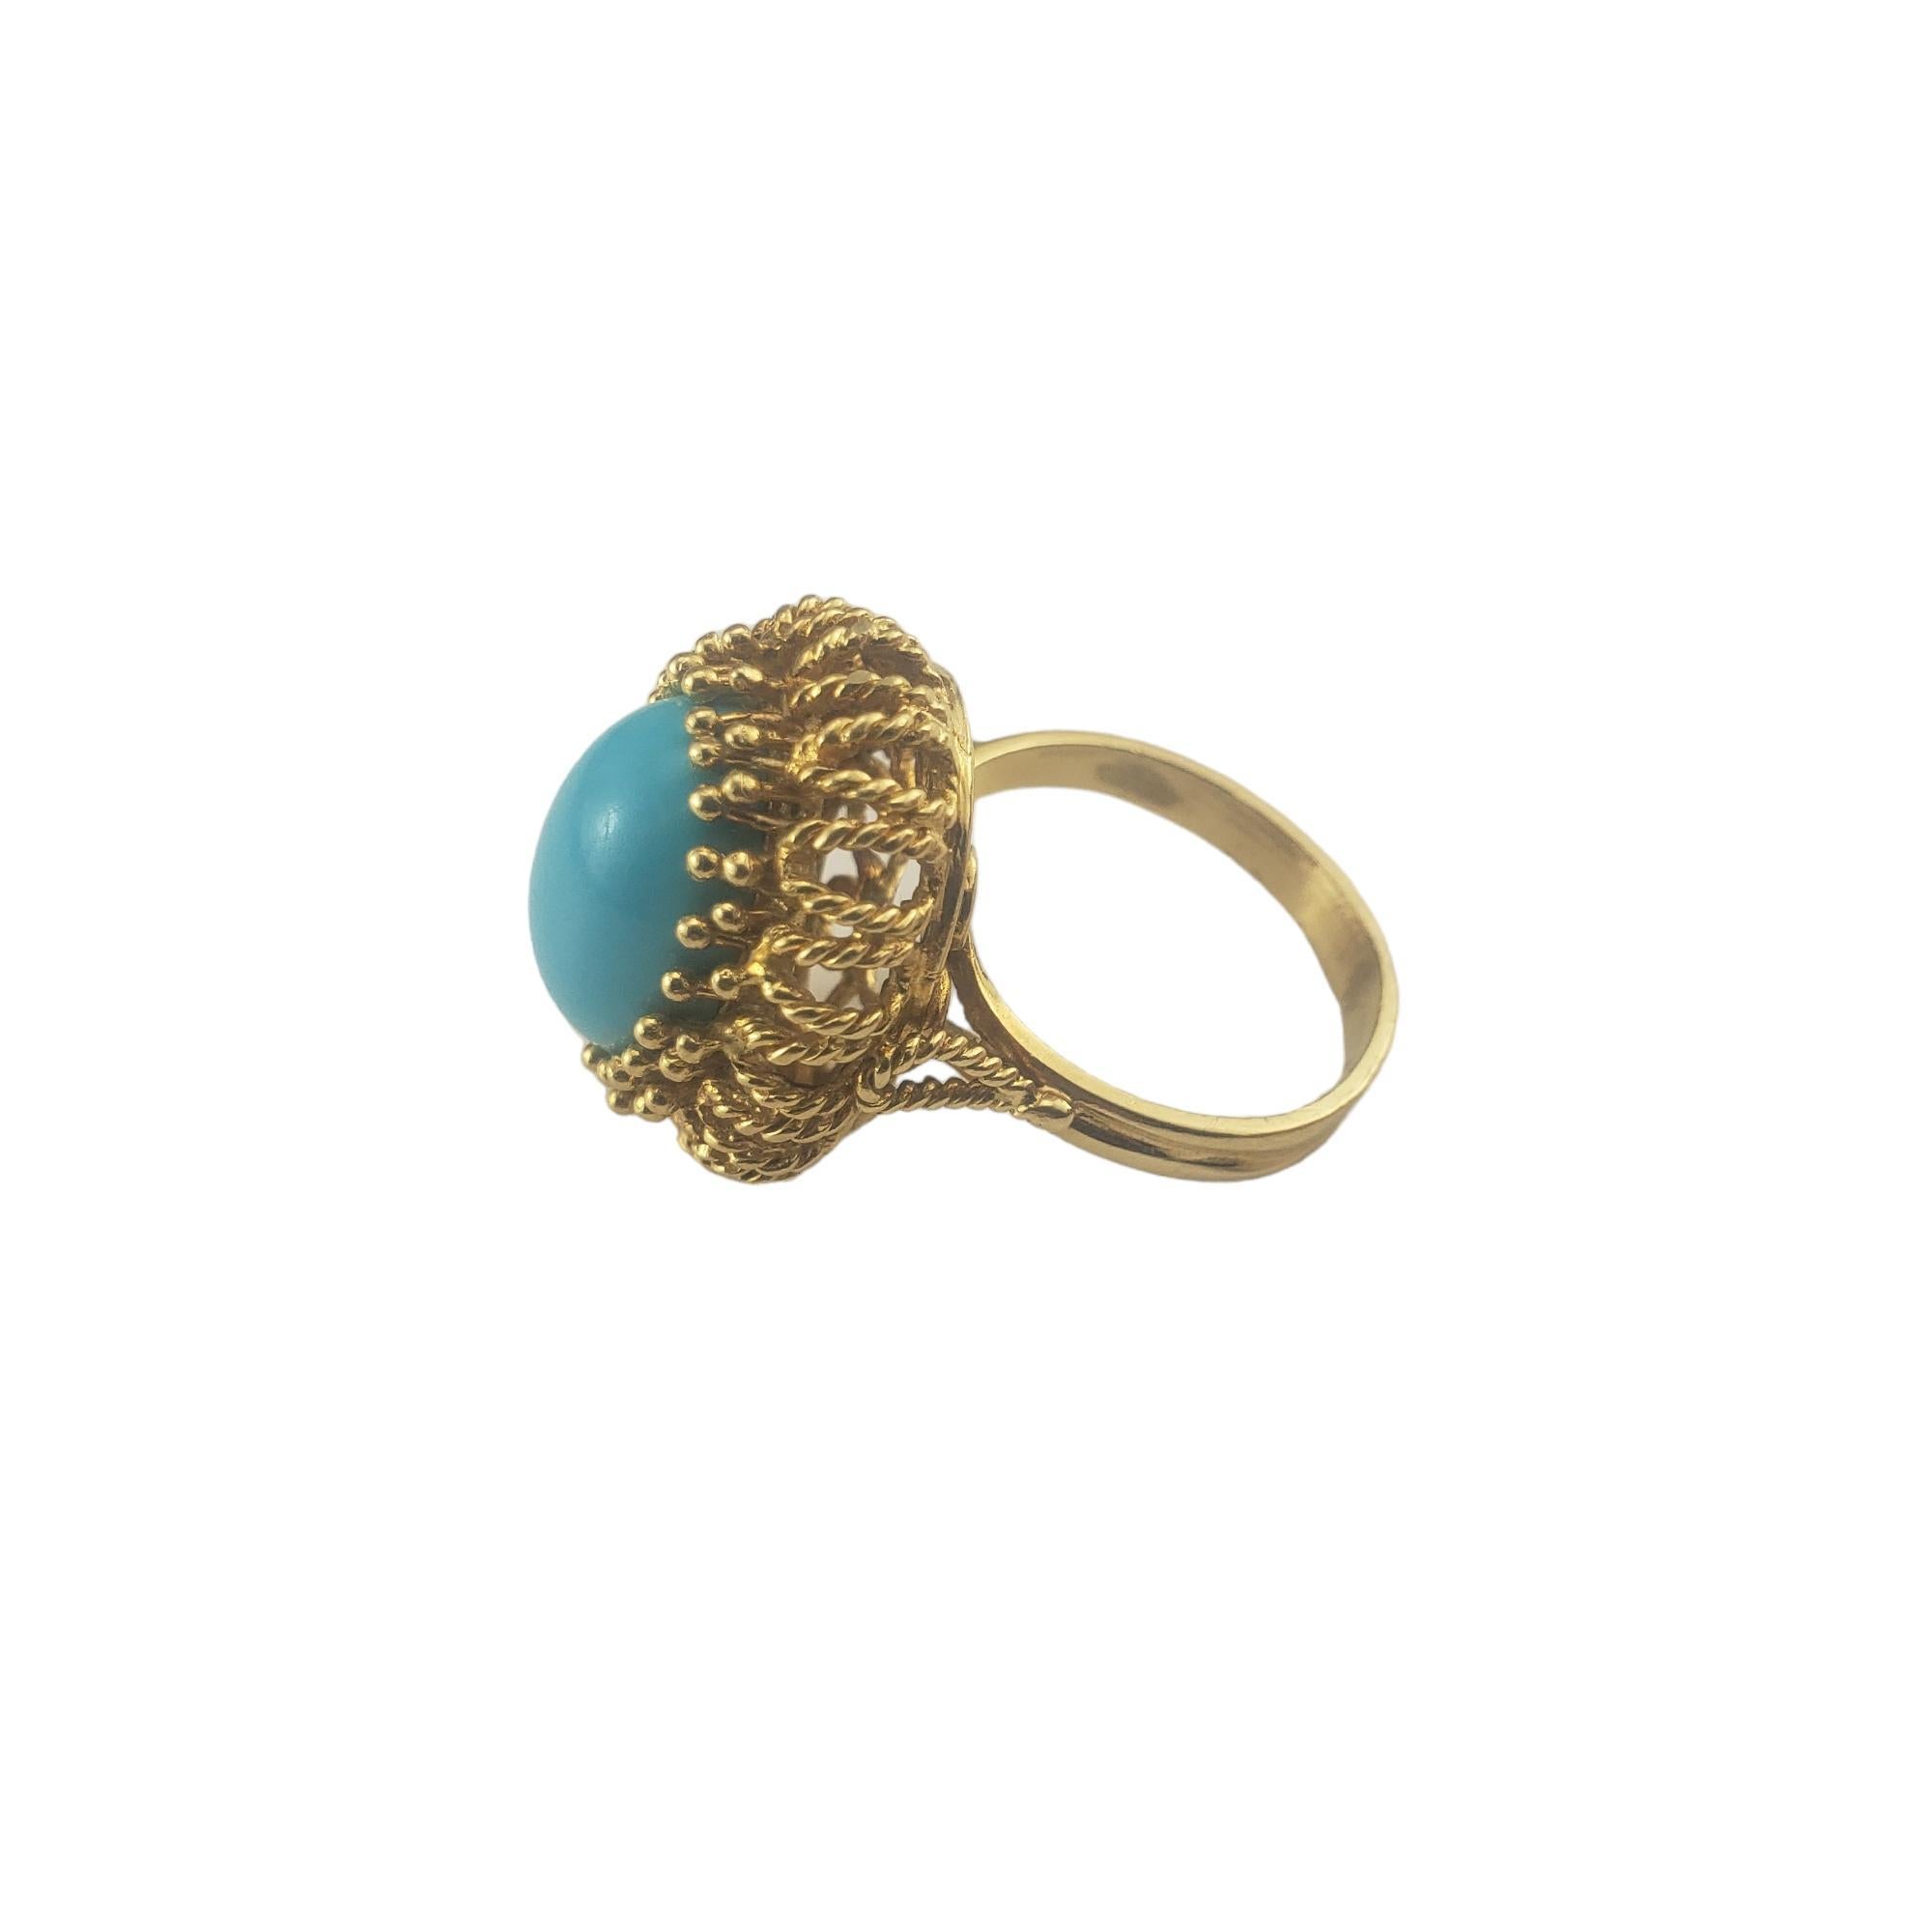 Cabochon 18 Karat Yellow Gold Turquoise Ring Size 6.5 #16769 For Sale